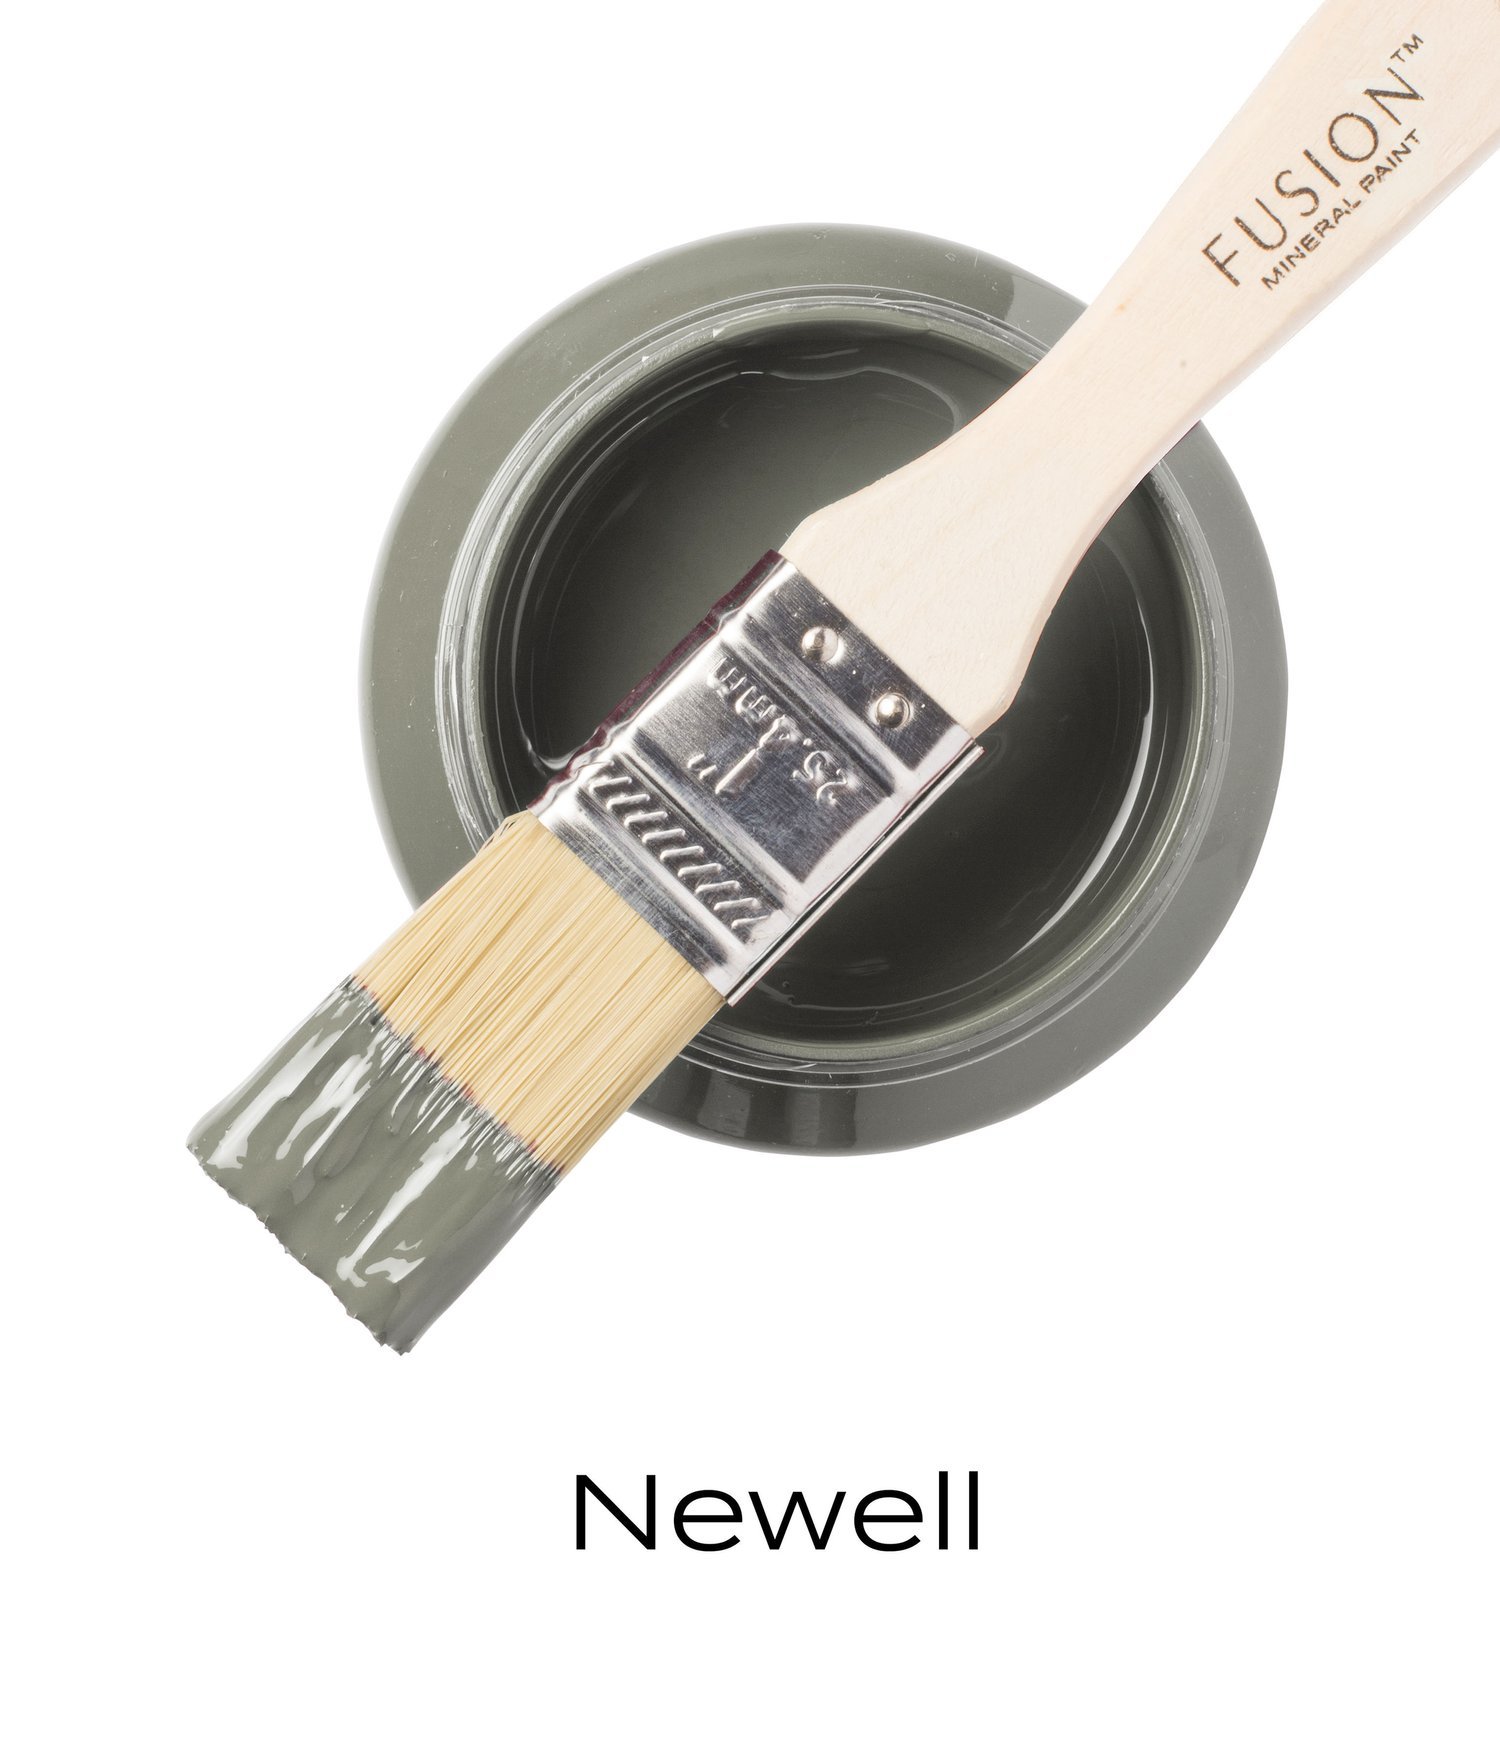 Fusion Paint - Newell